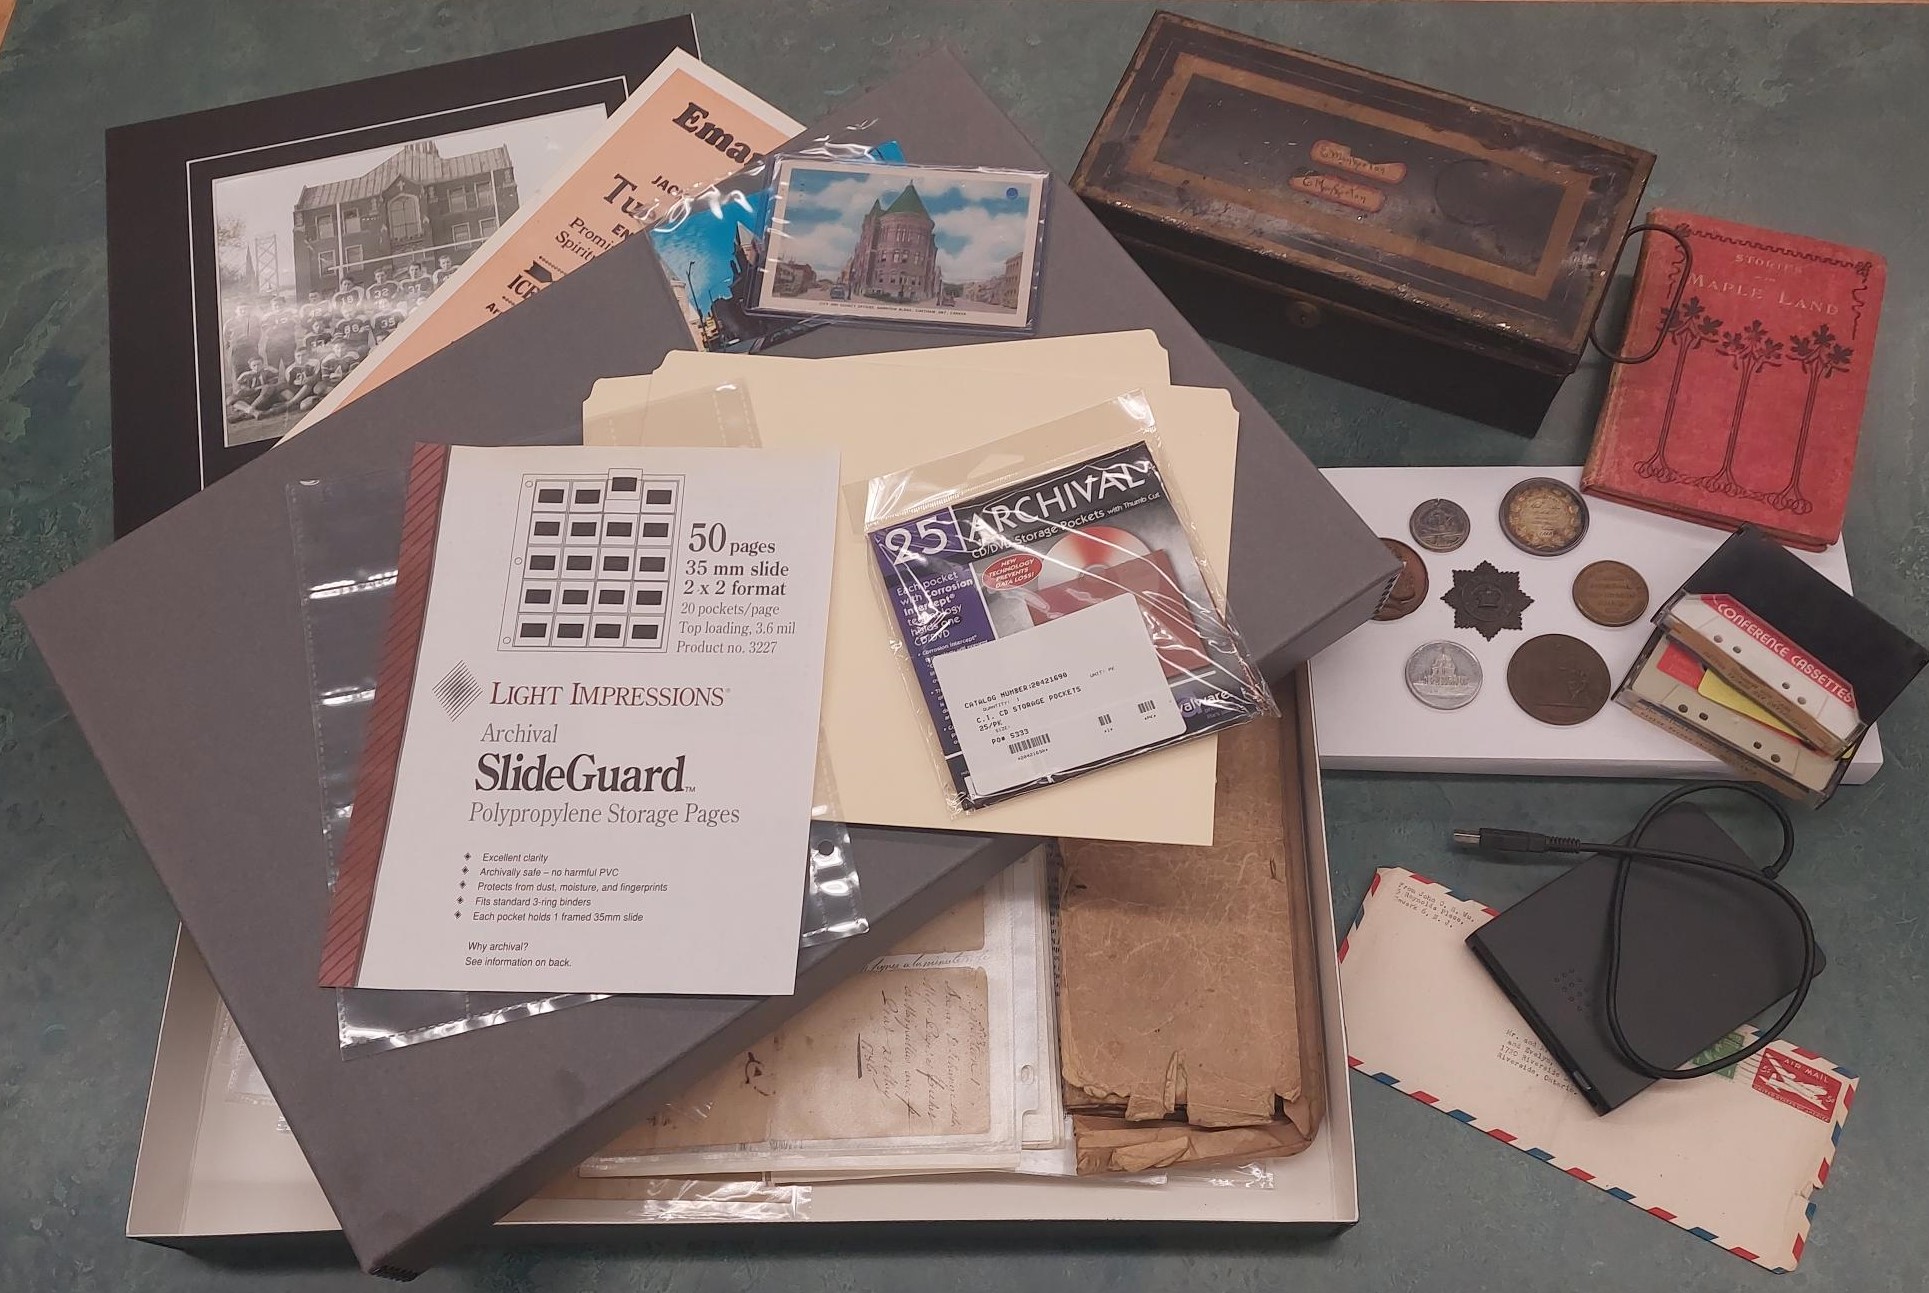 historic items and archival preservation supplies fanned out on a tabletop